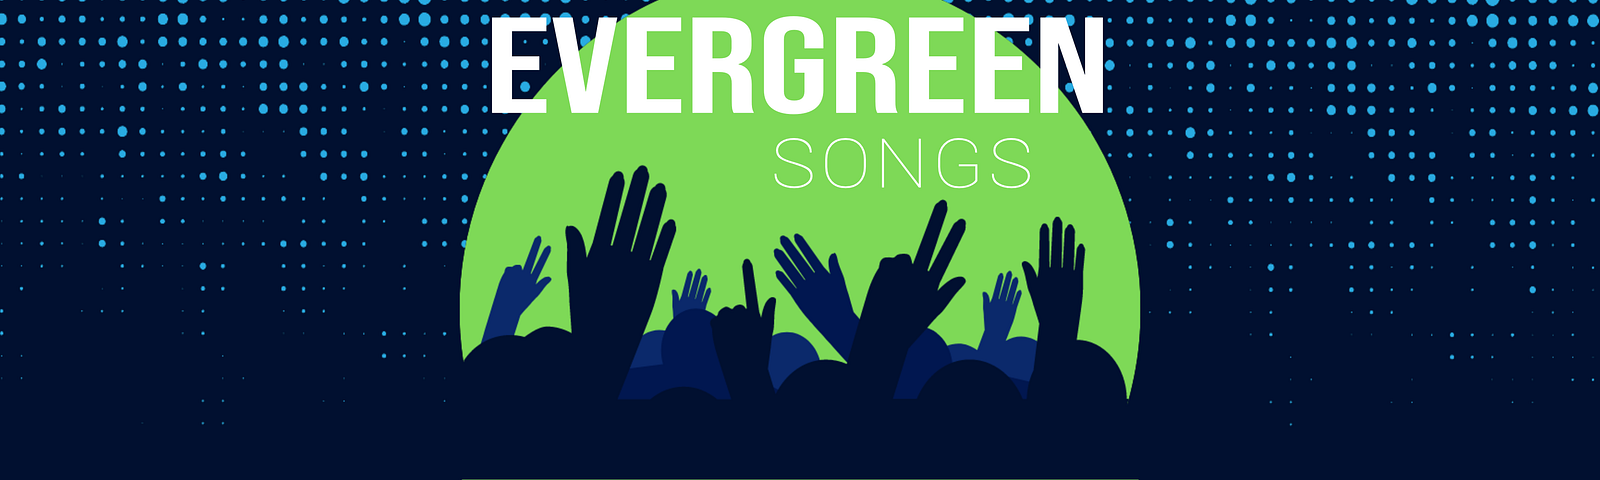 2020 Songwriters Review — Evergreen songs featured photo